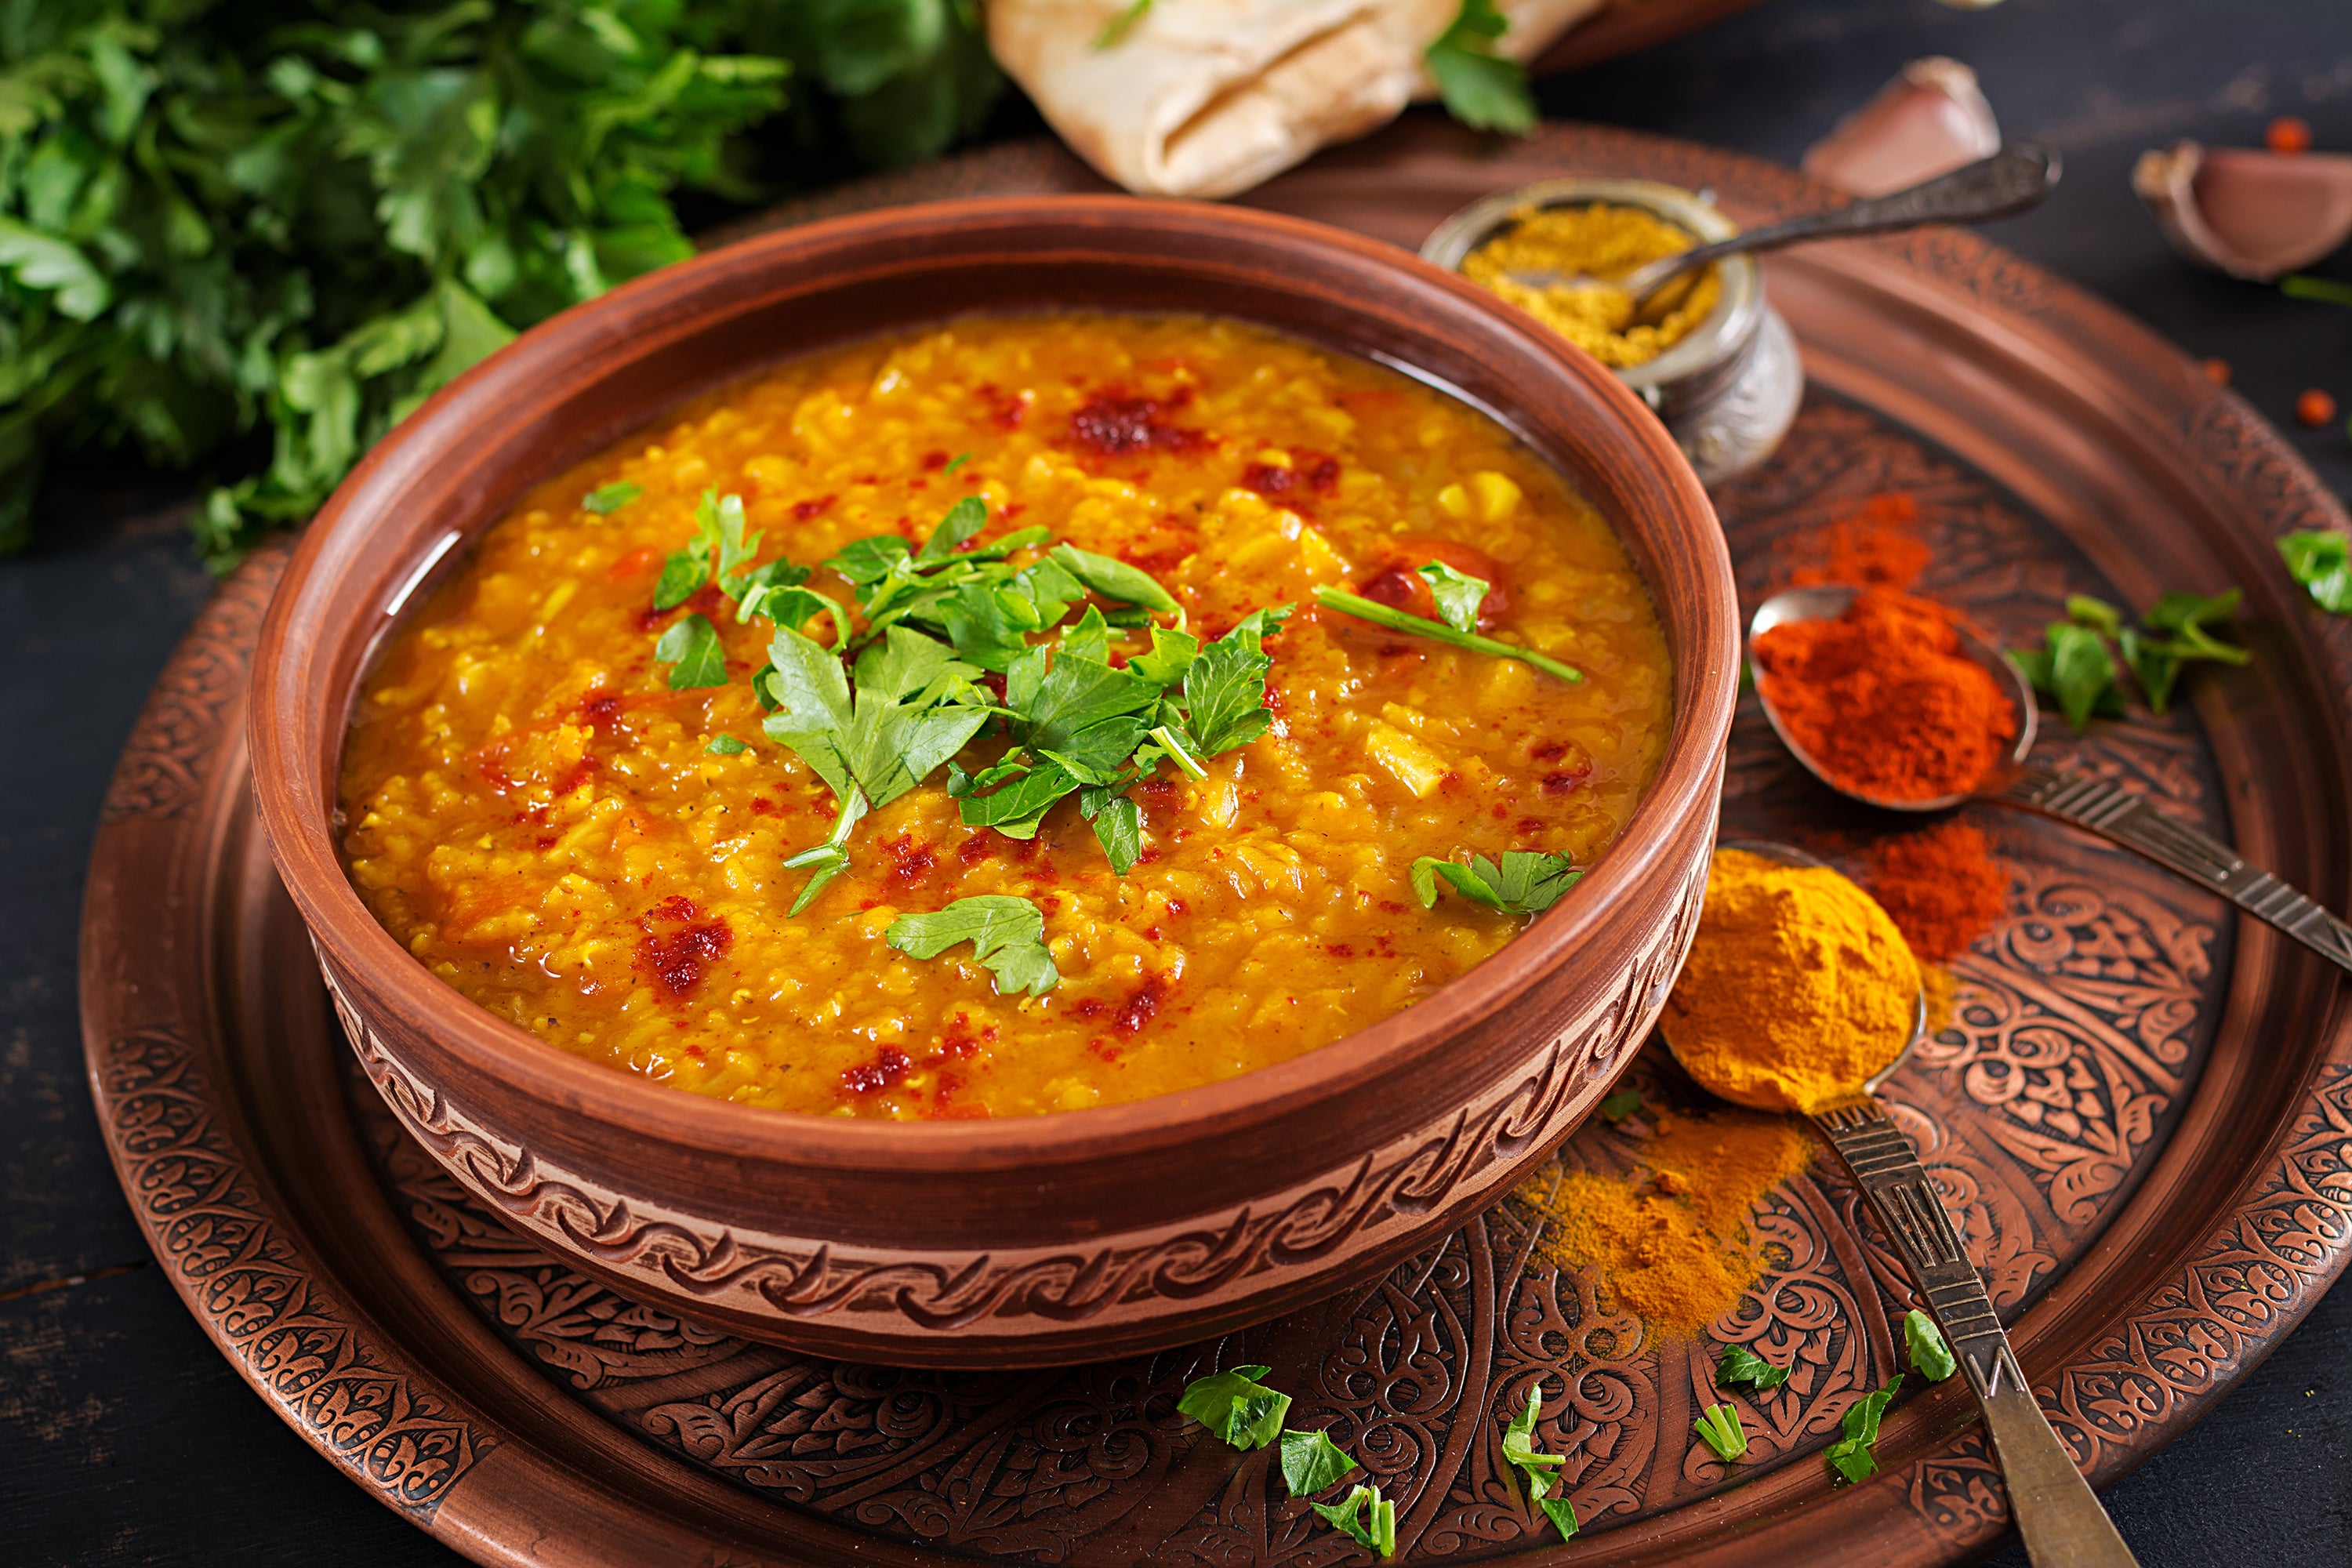 Indian Spiced Lentils is made with lentils, spices such as mustard powder, cumin, and coriander, and vegetables such as onions and tomatoes.